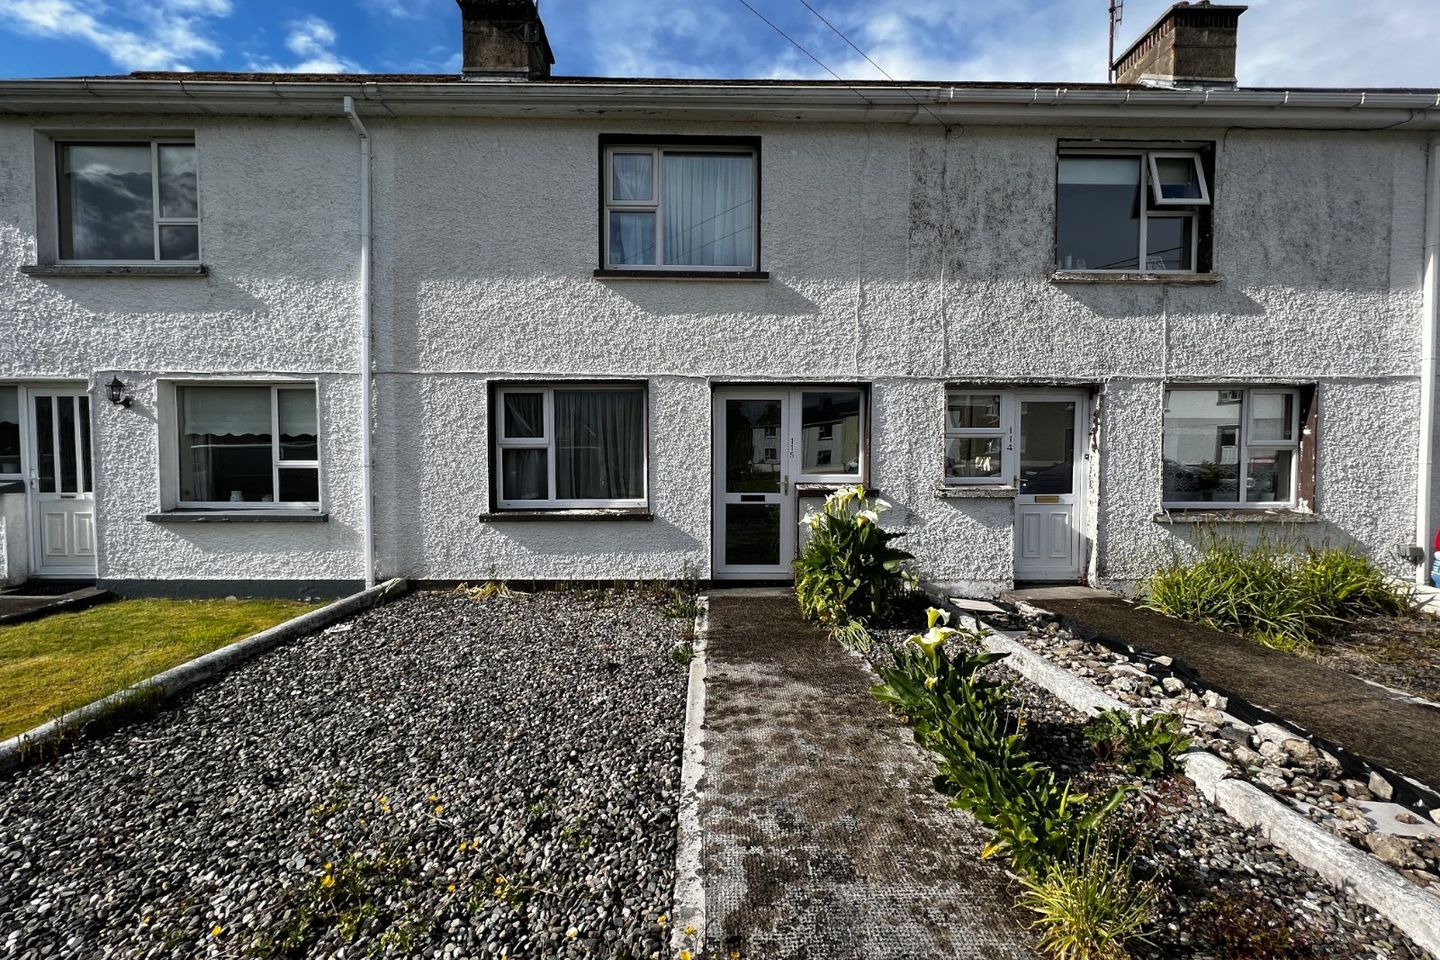 115 Ard Patrick, Glenties, Co. Donegal